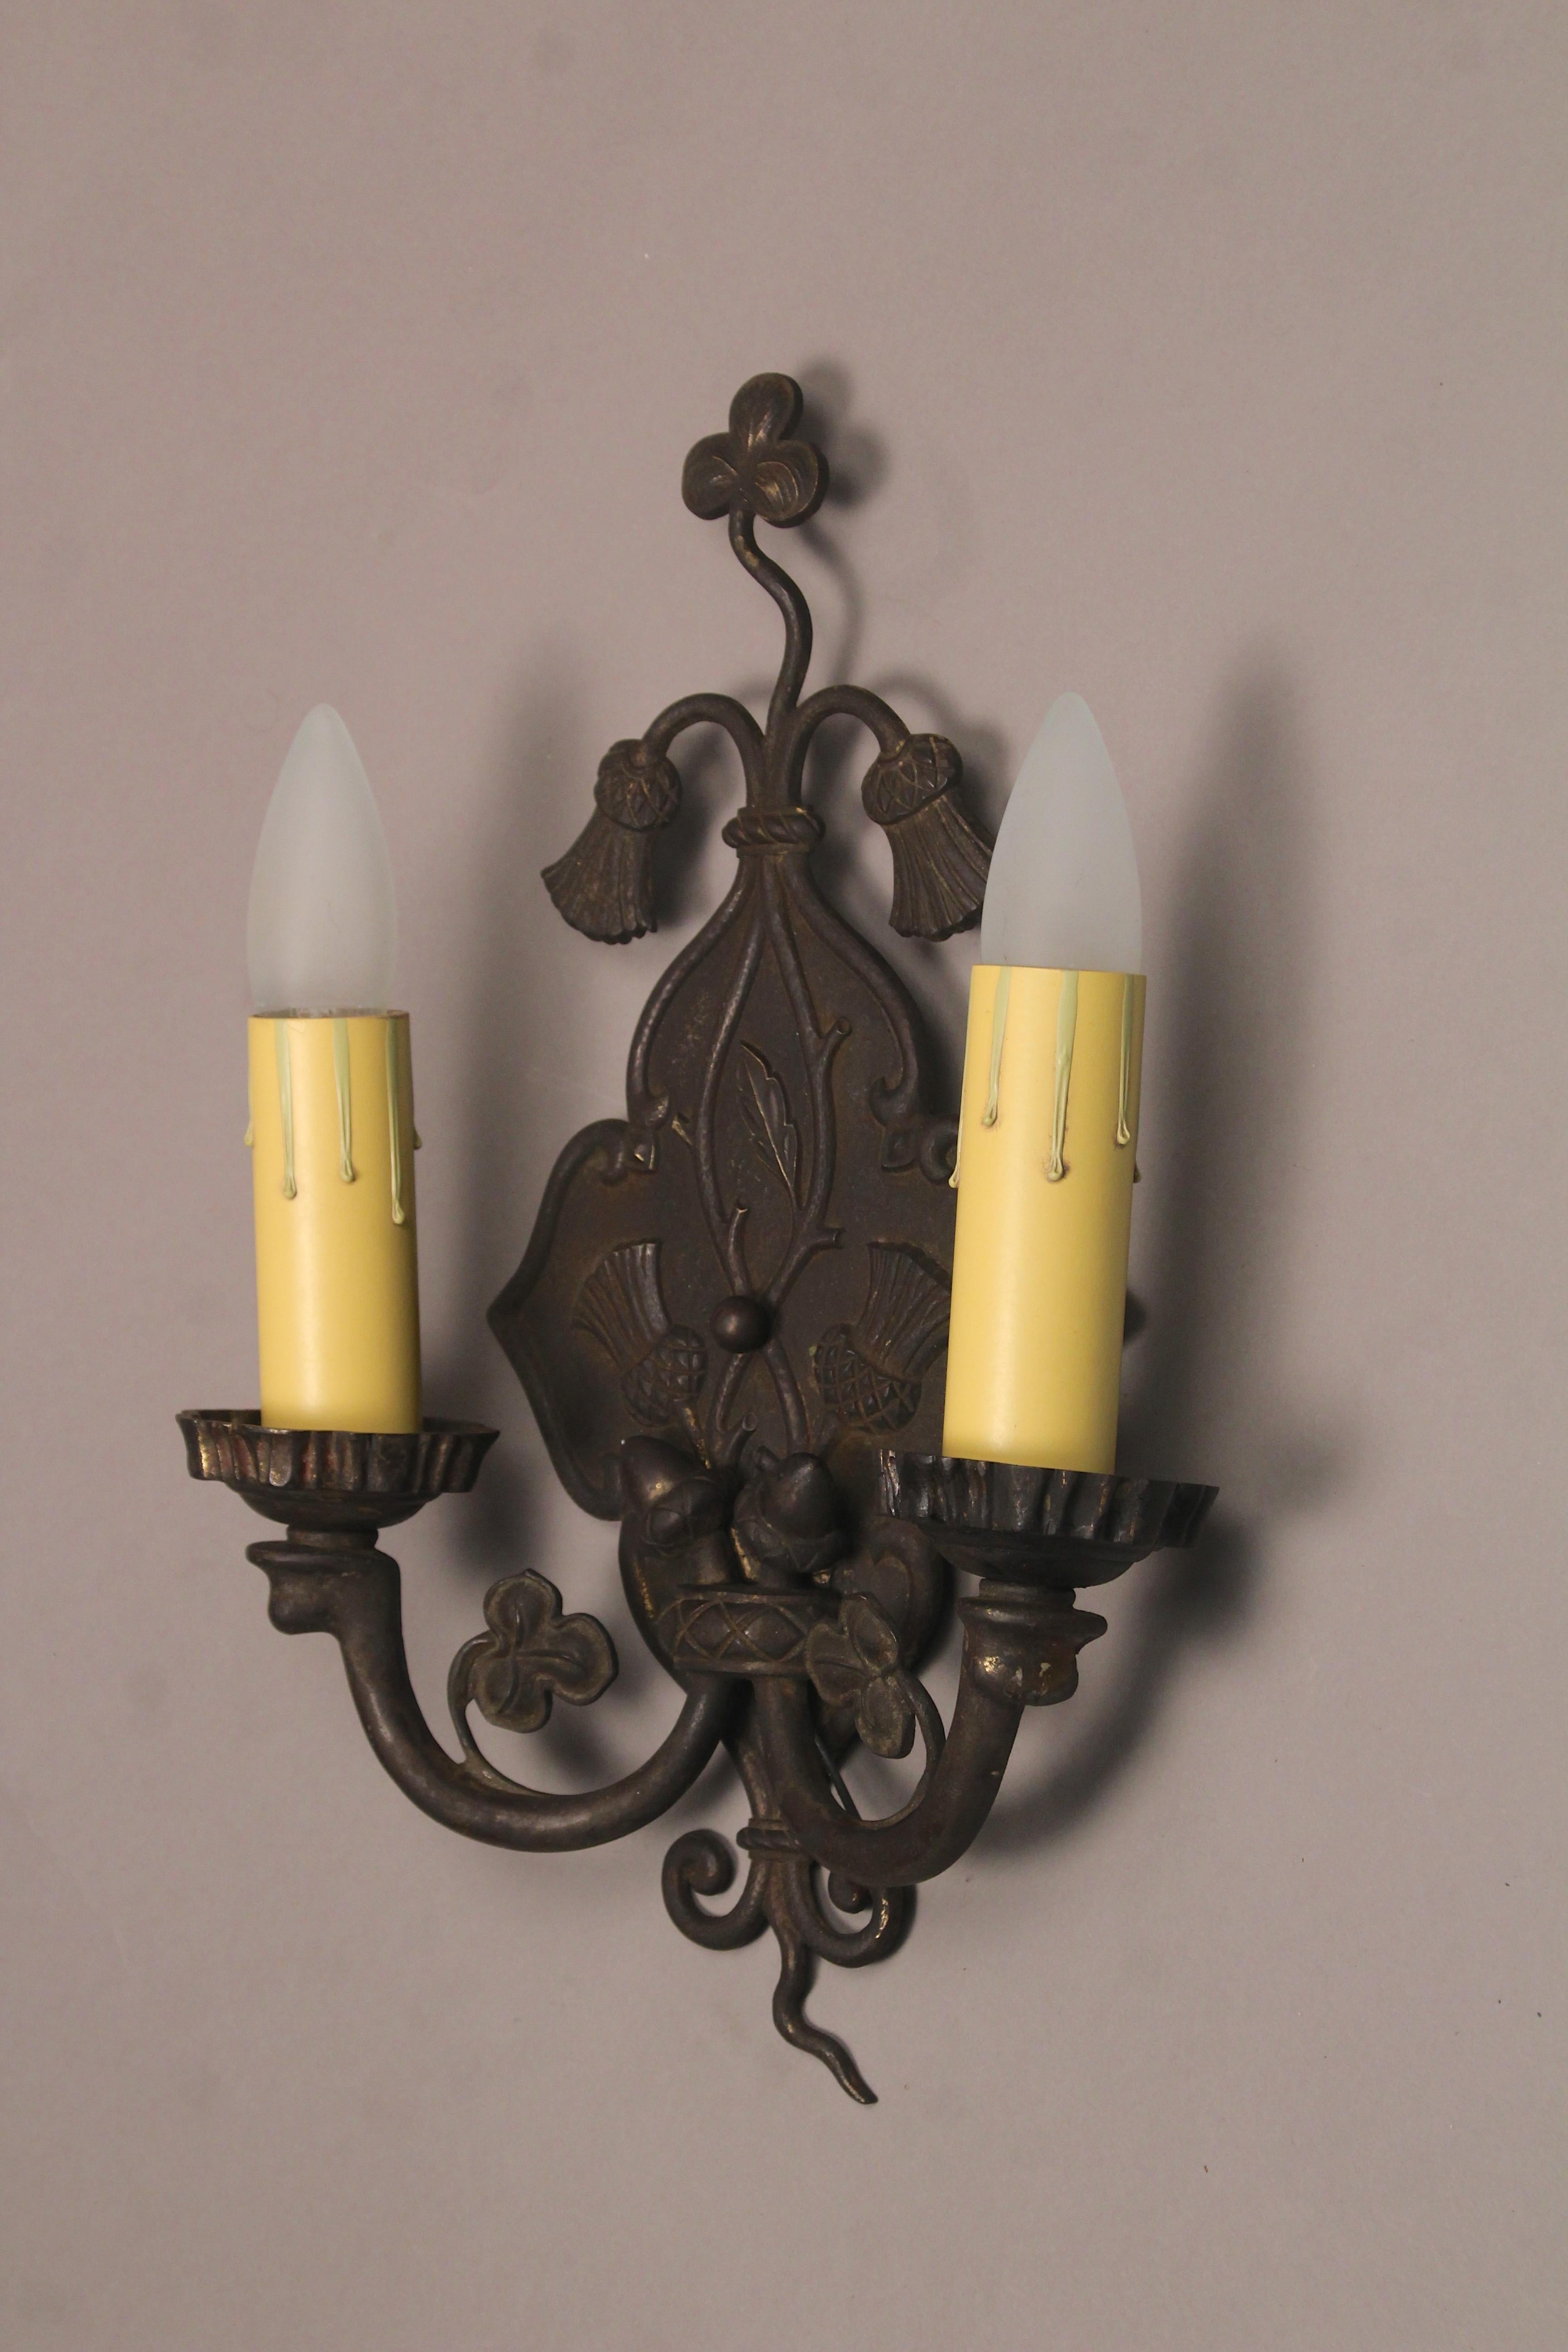 Pair of double sconces with thistle and clover motif. This pair would fit nicely in a Spanish Revival or English Tudor home, circa 1920s.